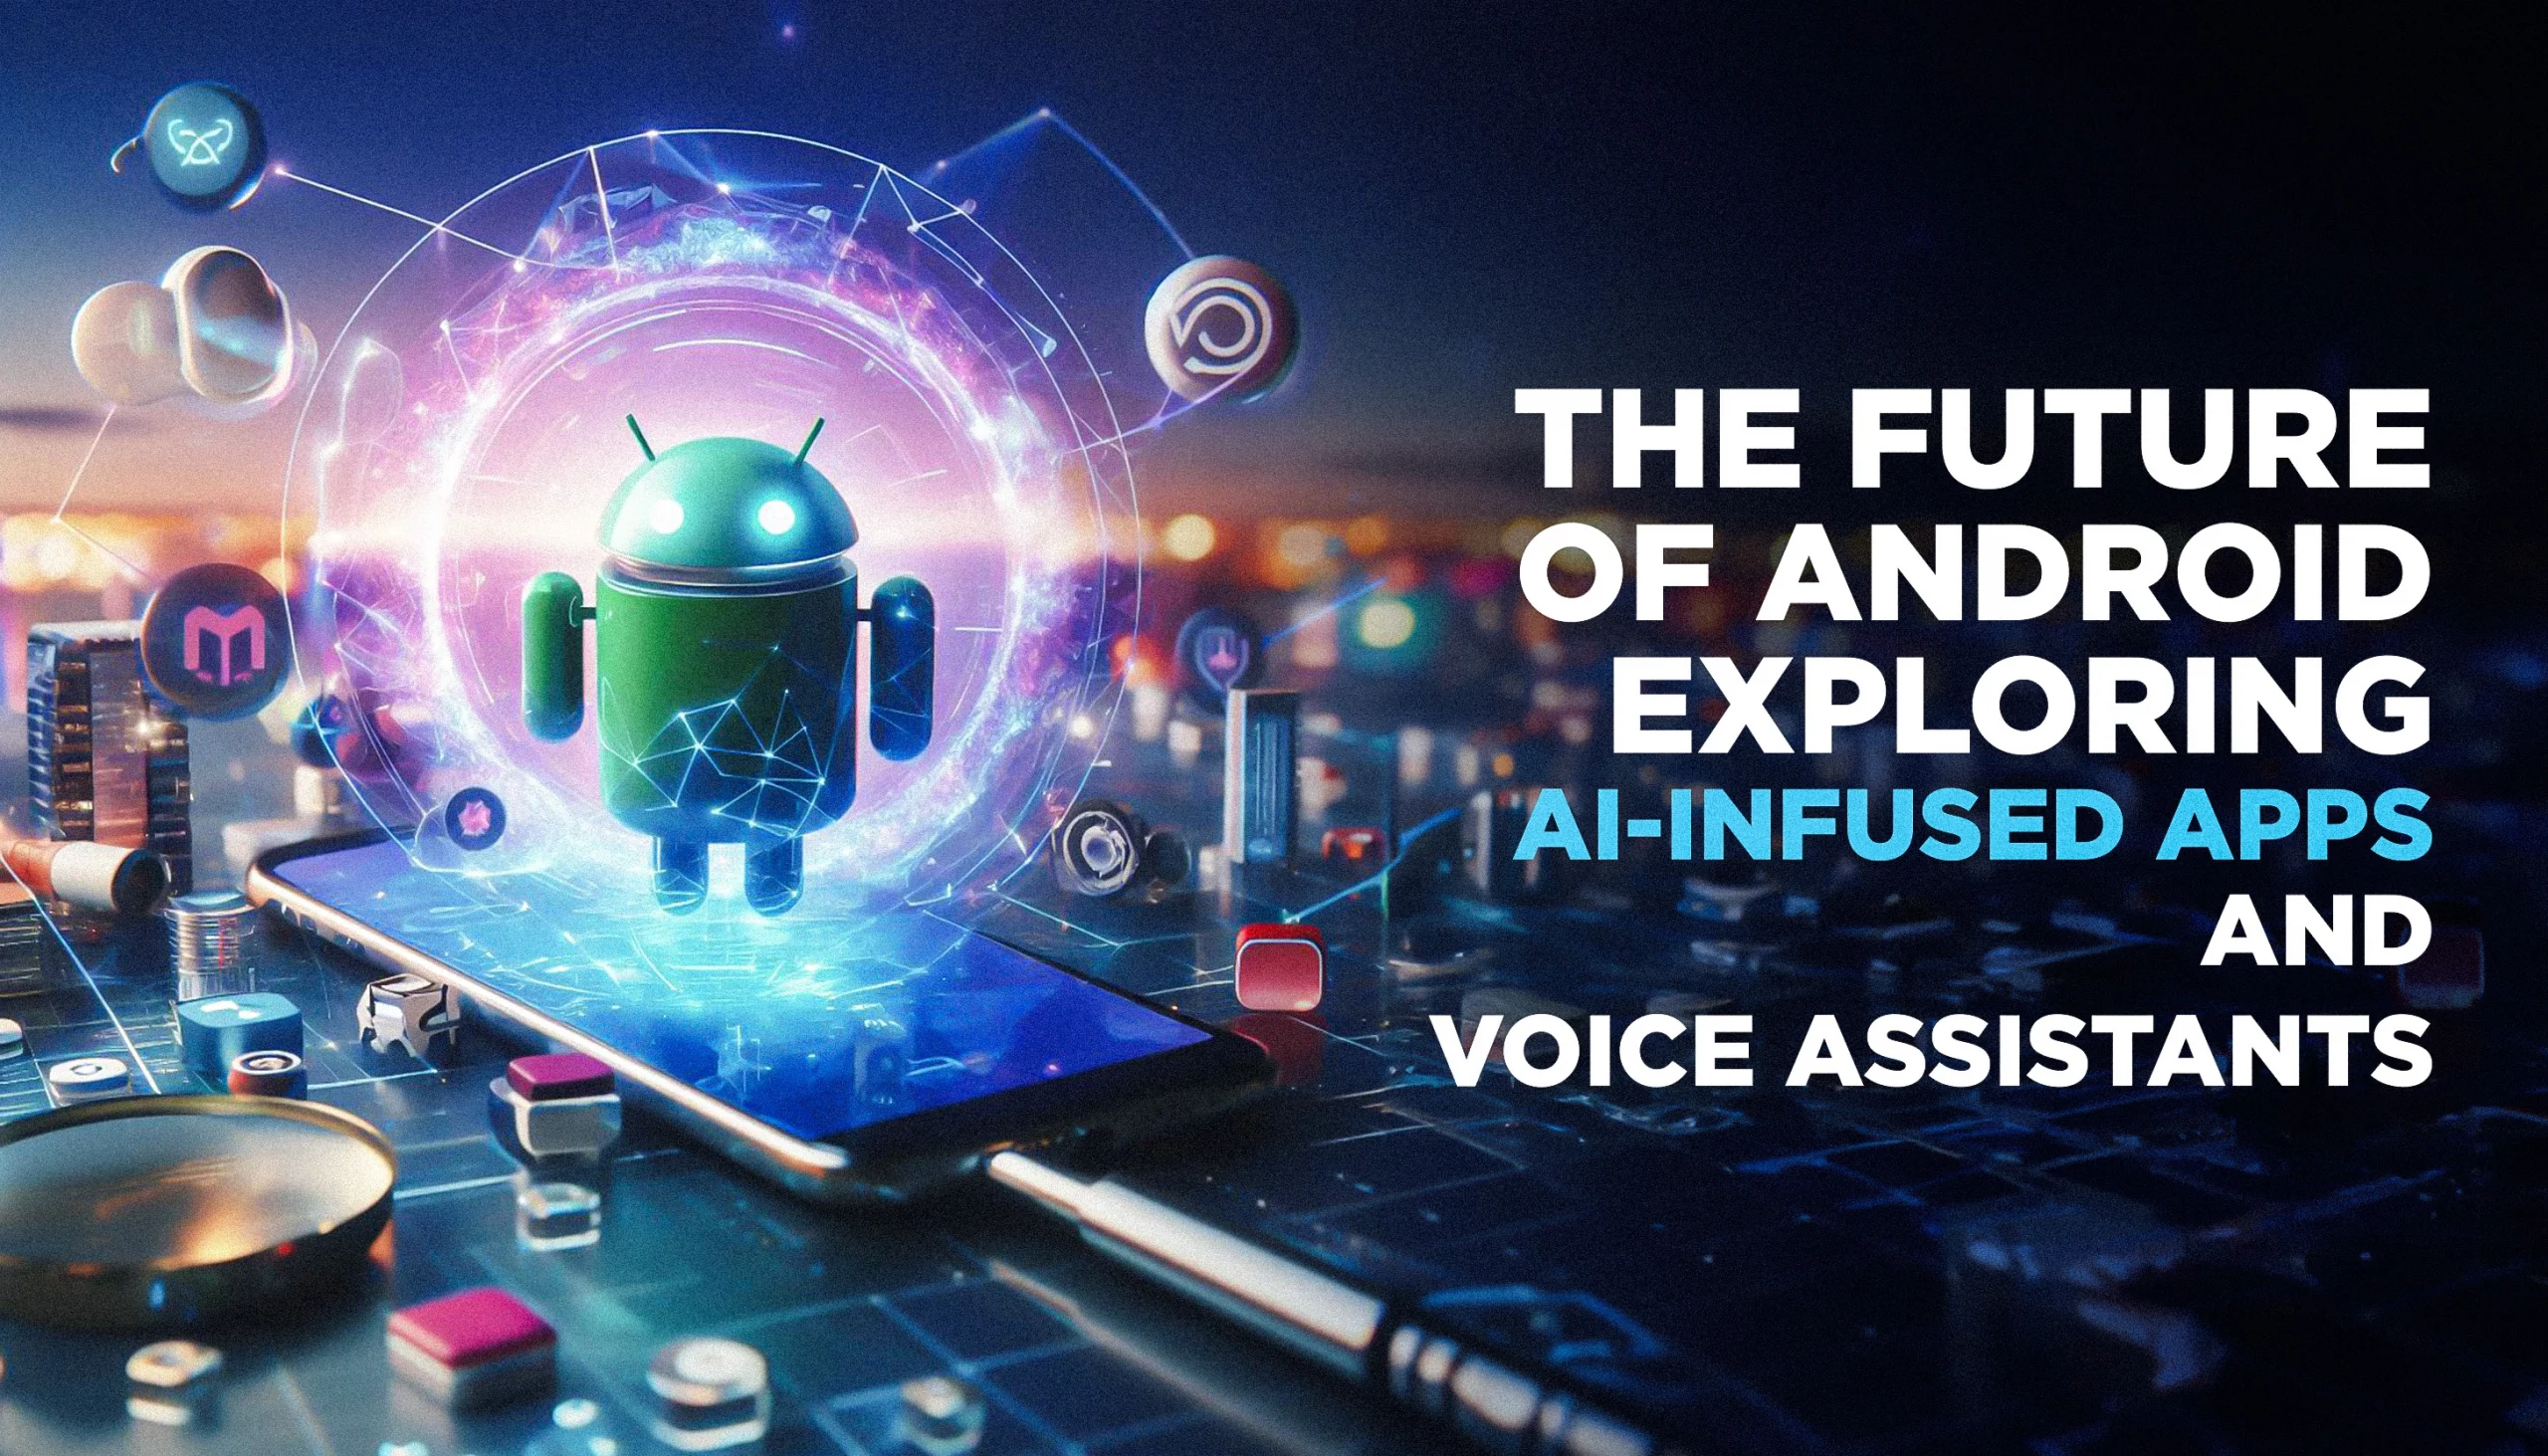 The Future of Android- Exploring AI-Infused Apps and Voice Assistants